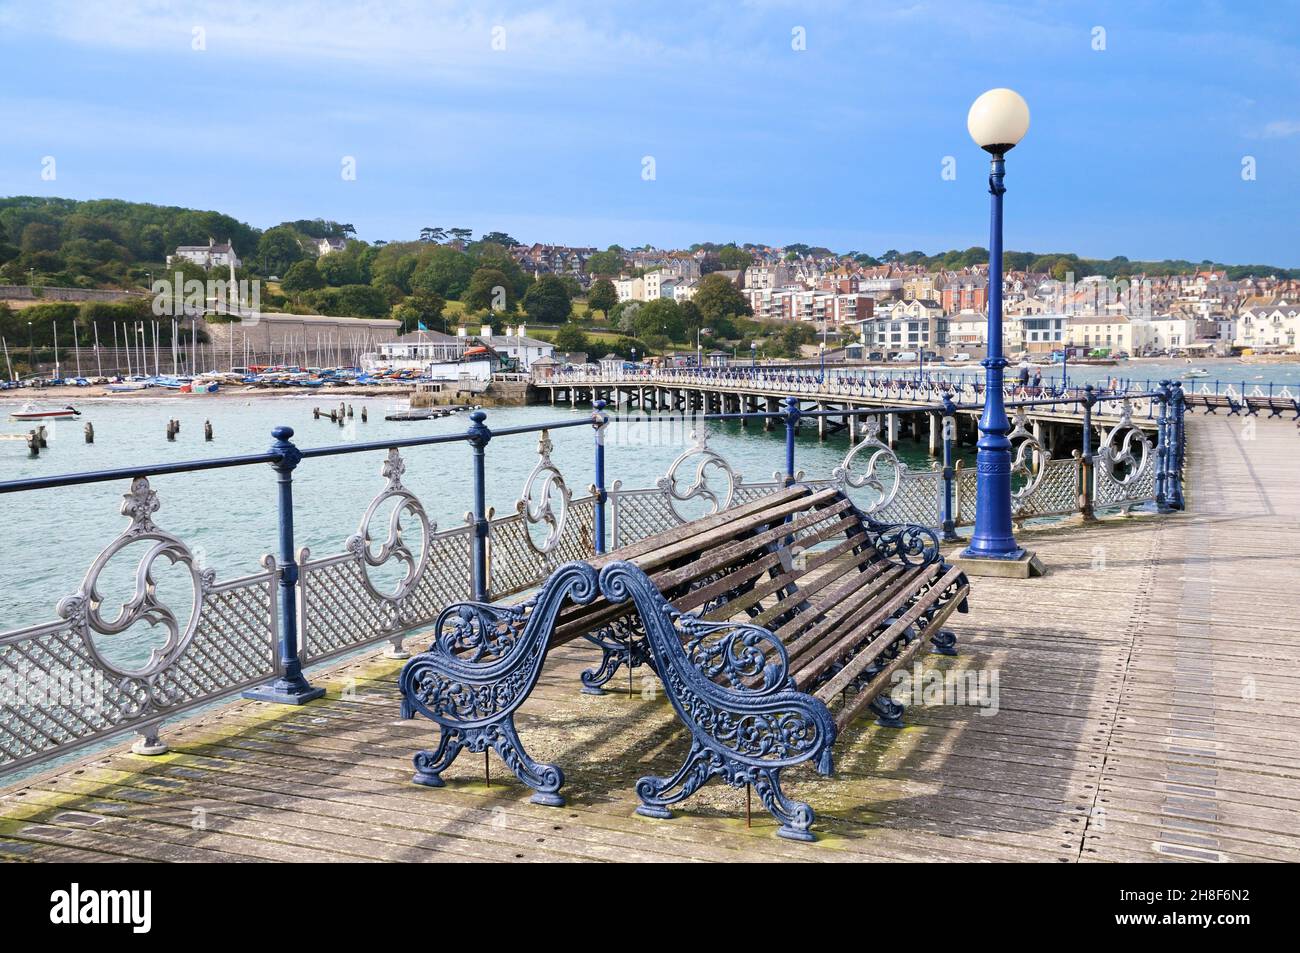 On the boardwalk of the restored Swanage Pier with its ornate benches, railings and lamp posts, Isle of Purbeck, Jurassic Coast, Dorset, England, UK Stock Photo